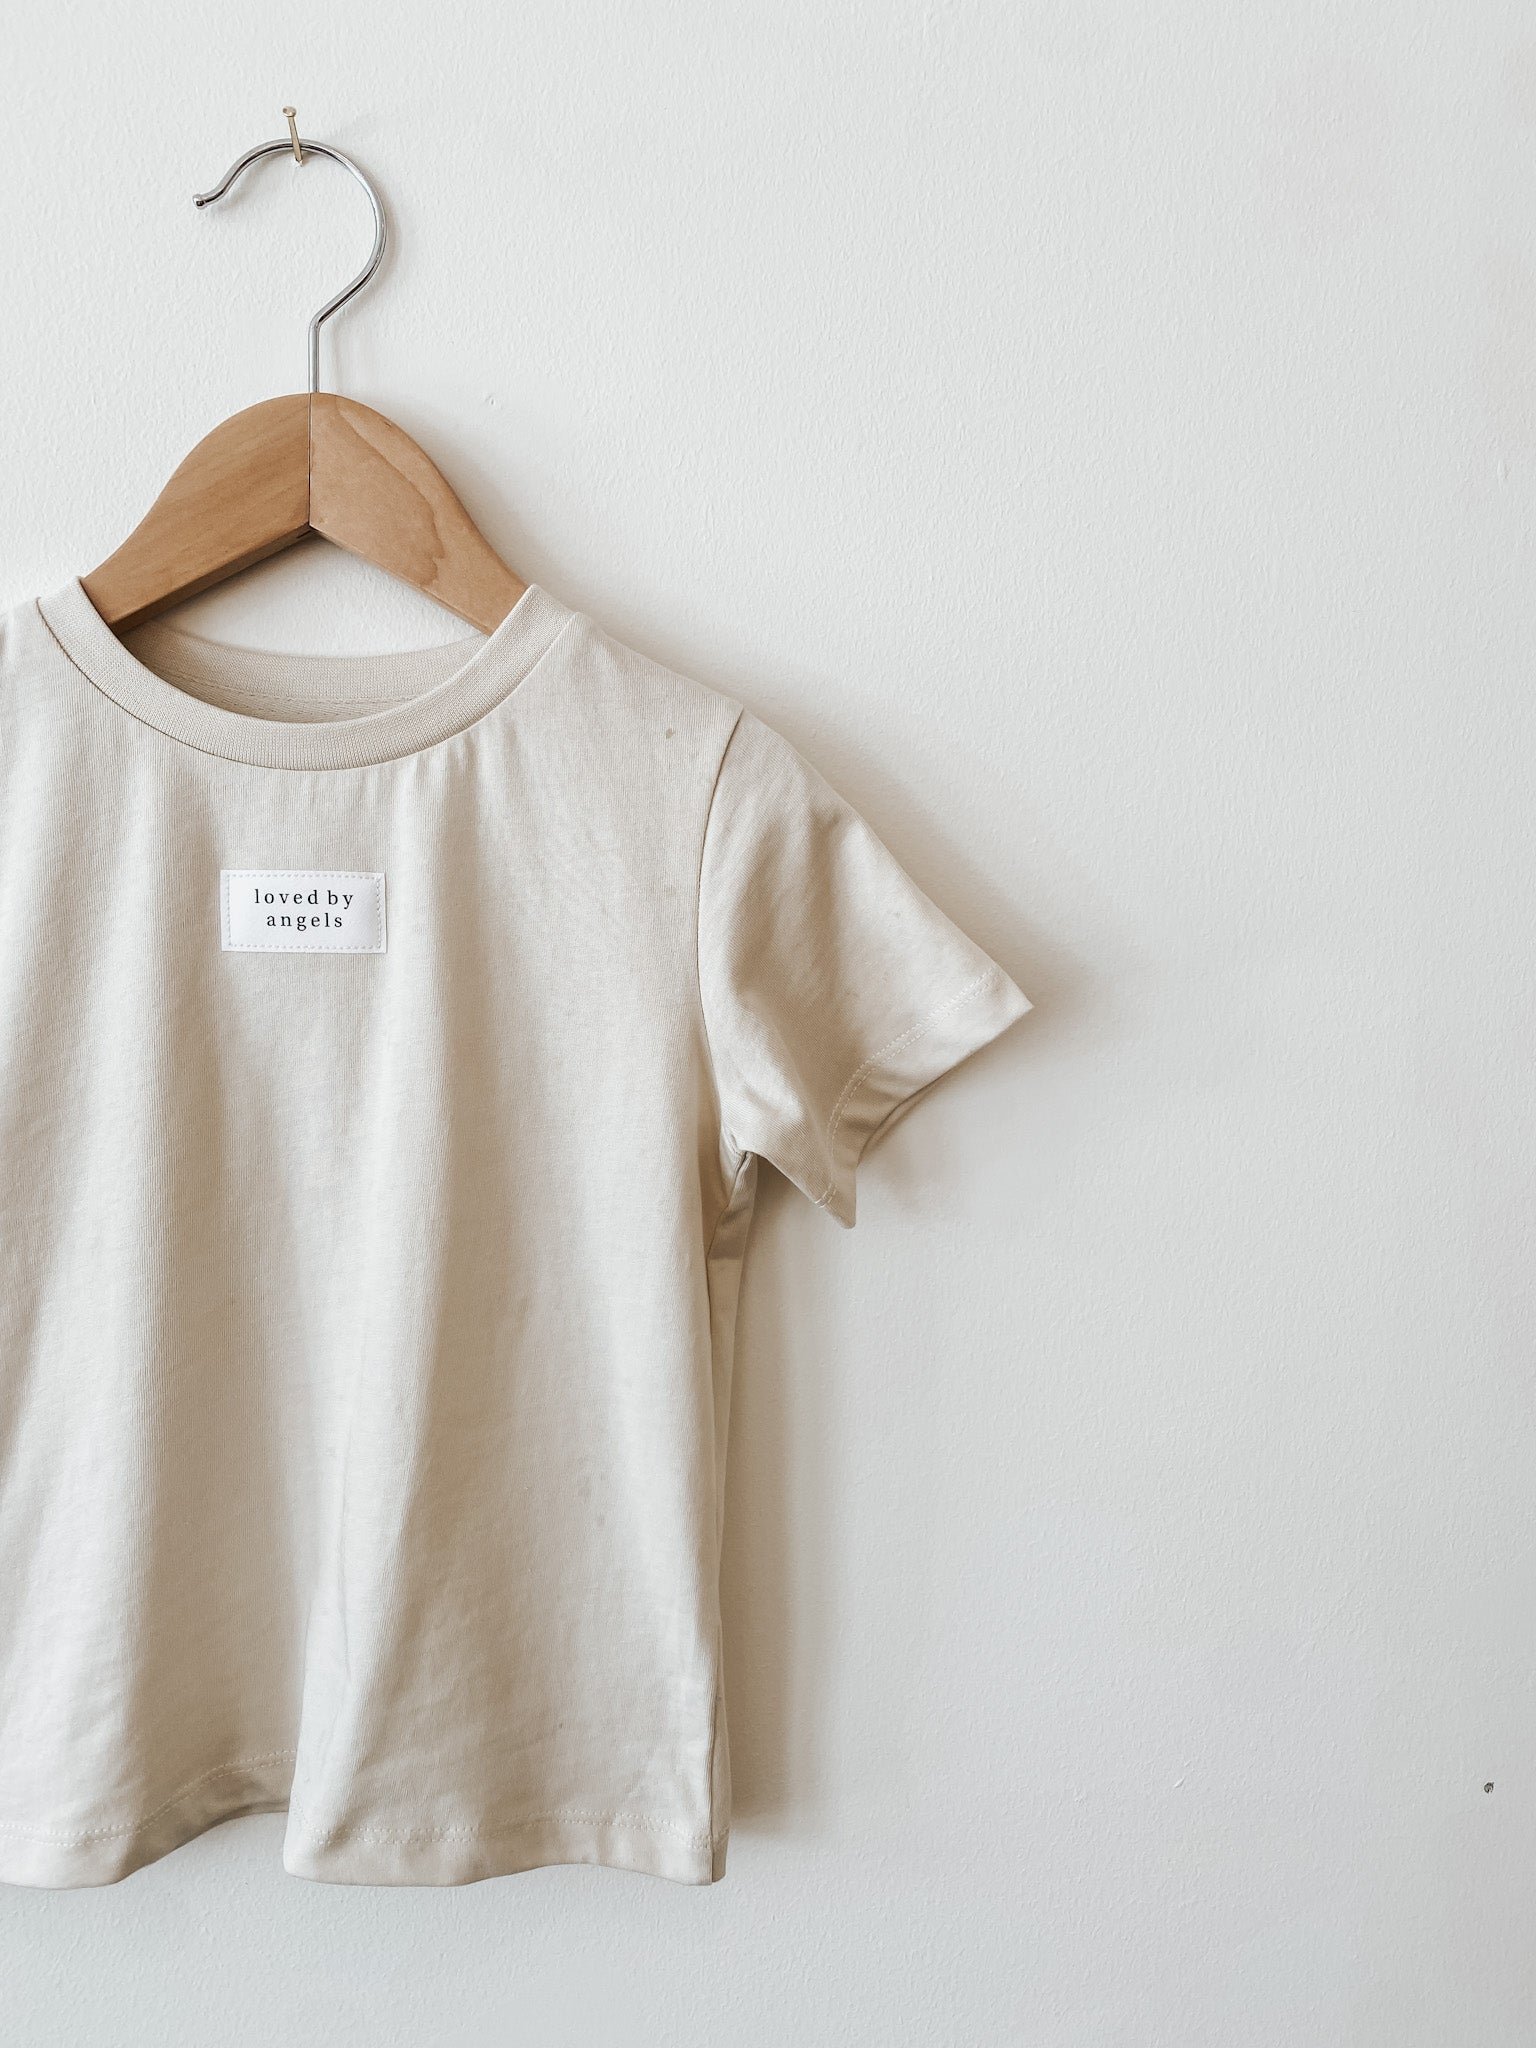 Classic Short Sleeve Tee | Loved By Angels